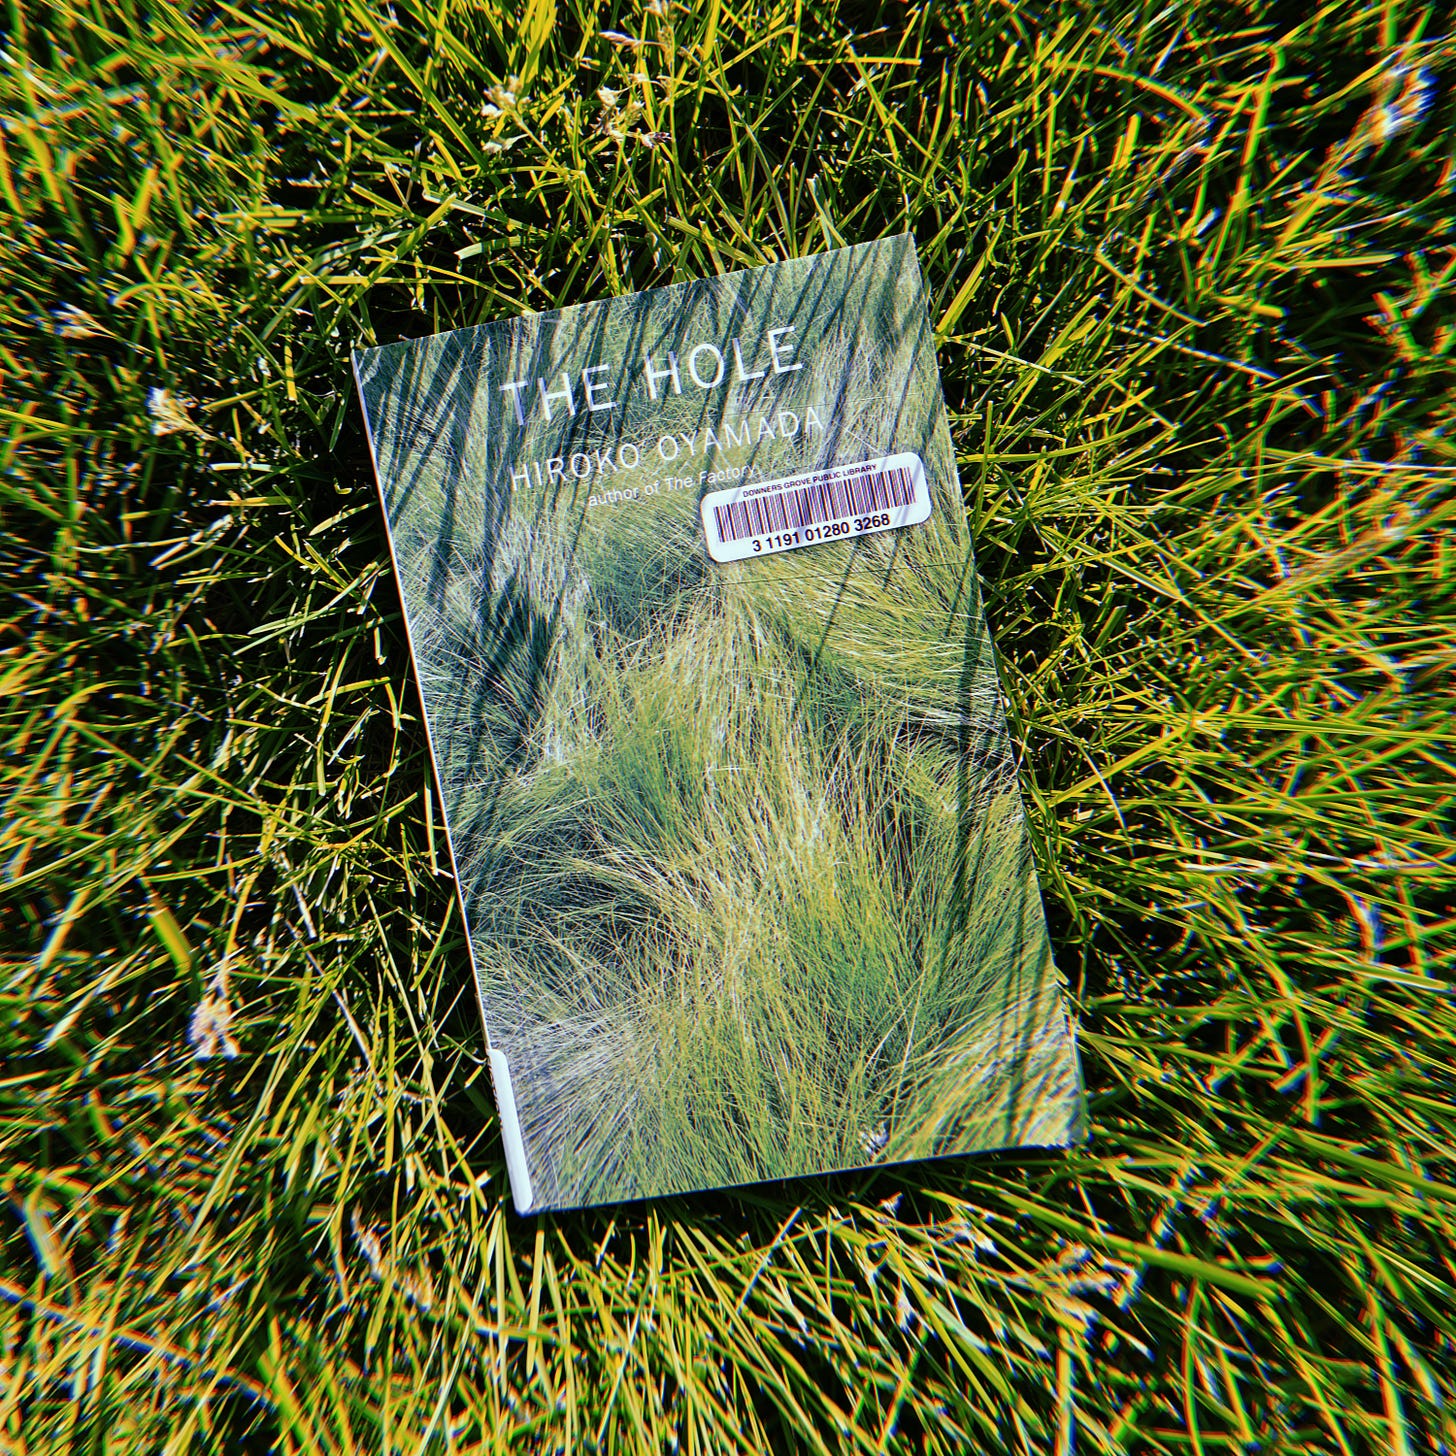 A photo of a book, The Hole by Hiroko Oyamada, in grass.